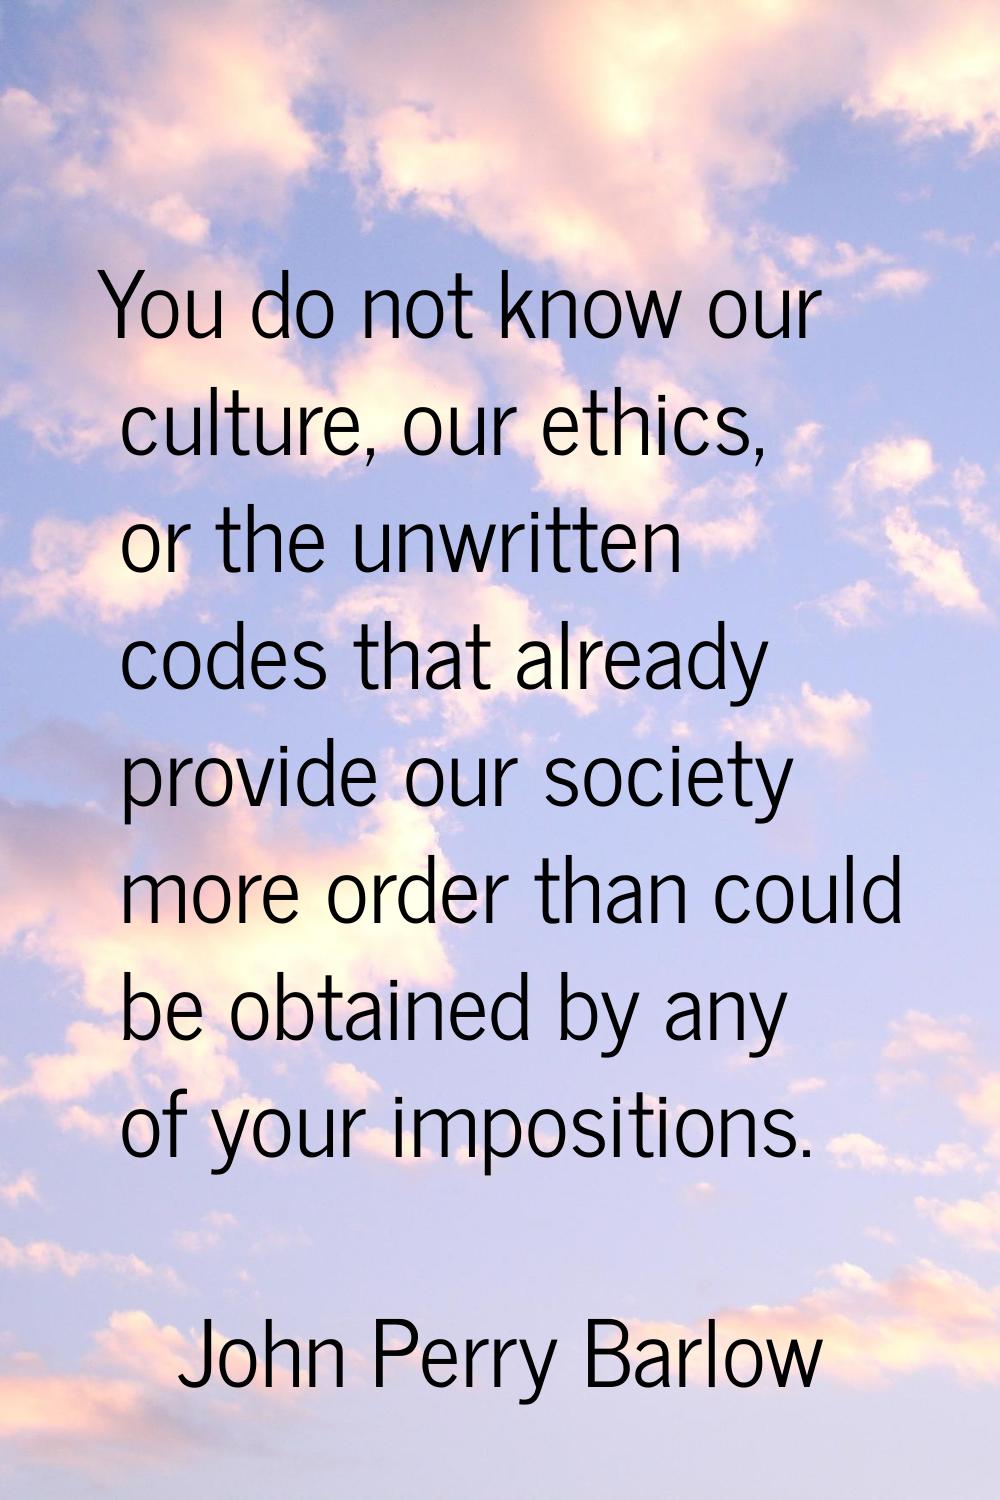 You do not know our culture, our ethics, or the unwritten codes that already provide our society mo